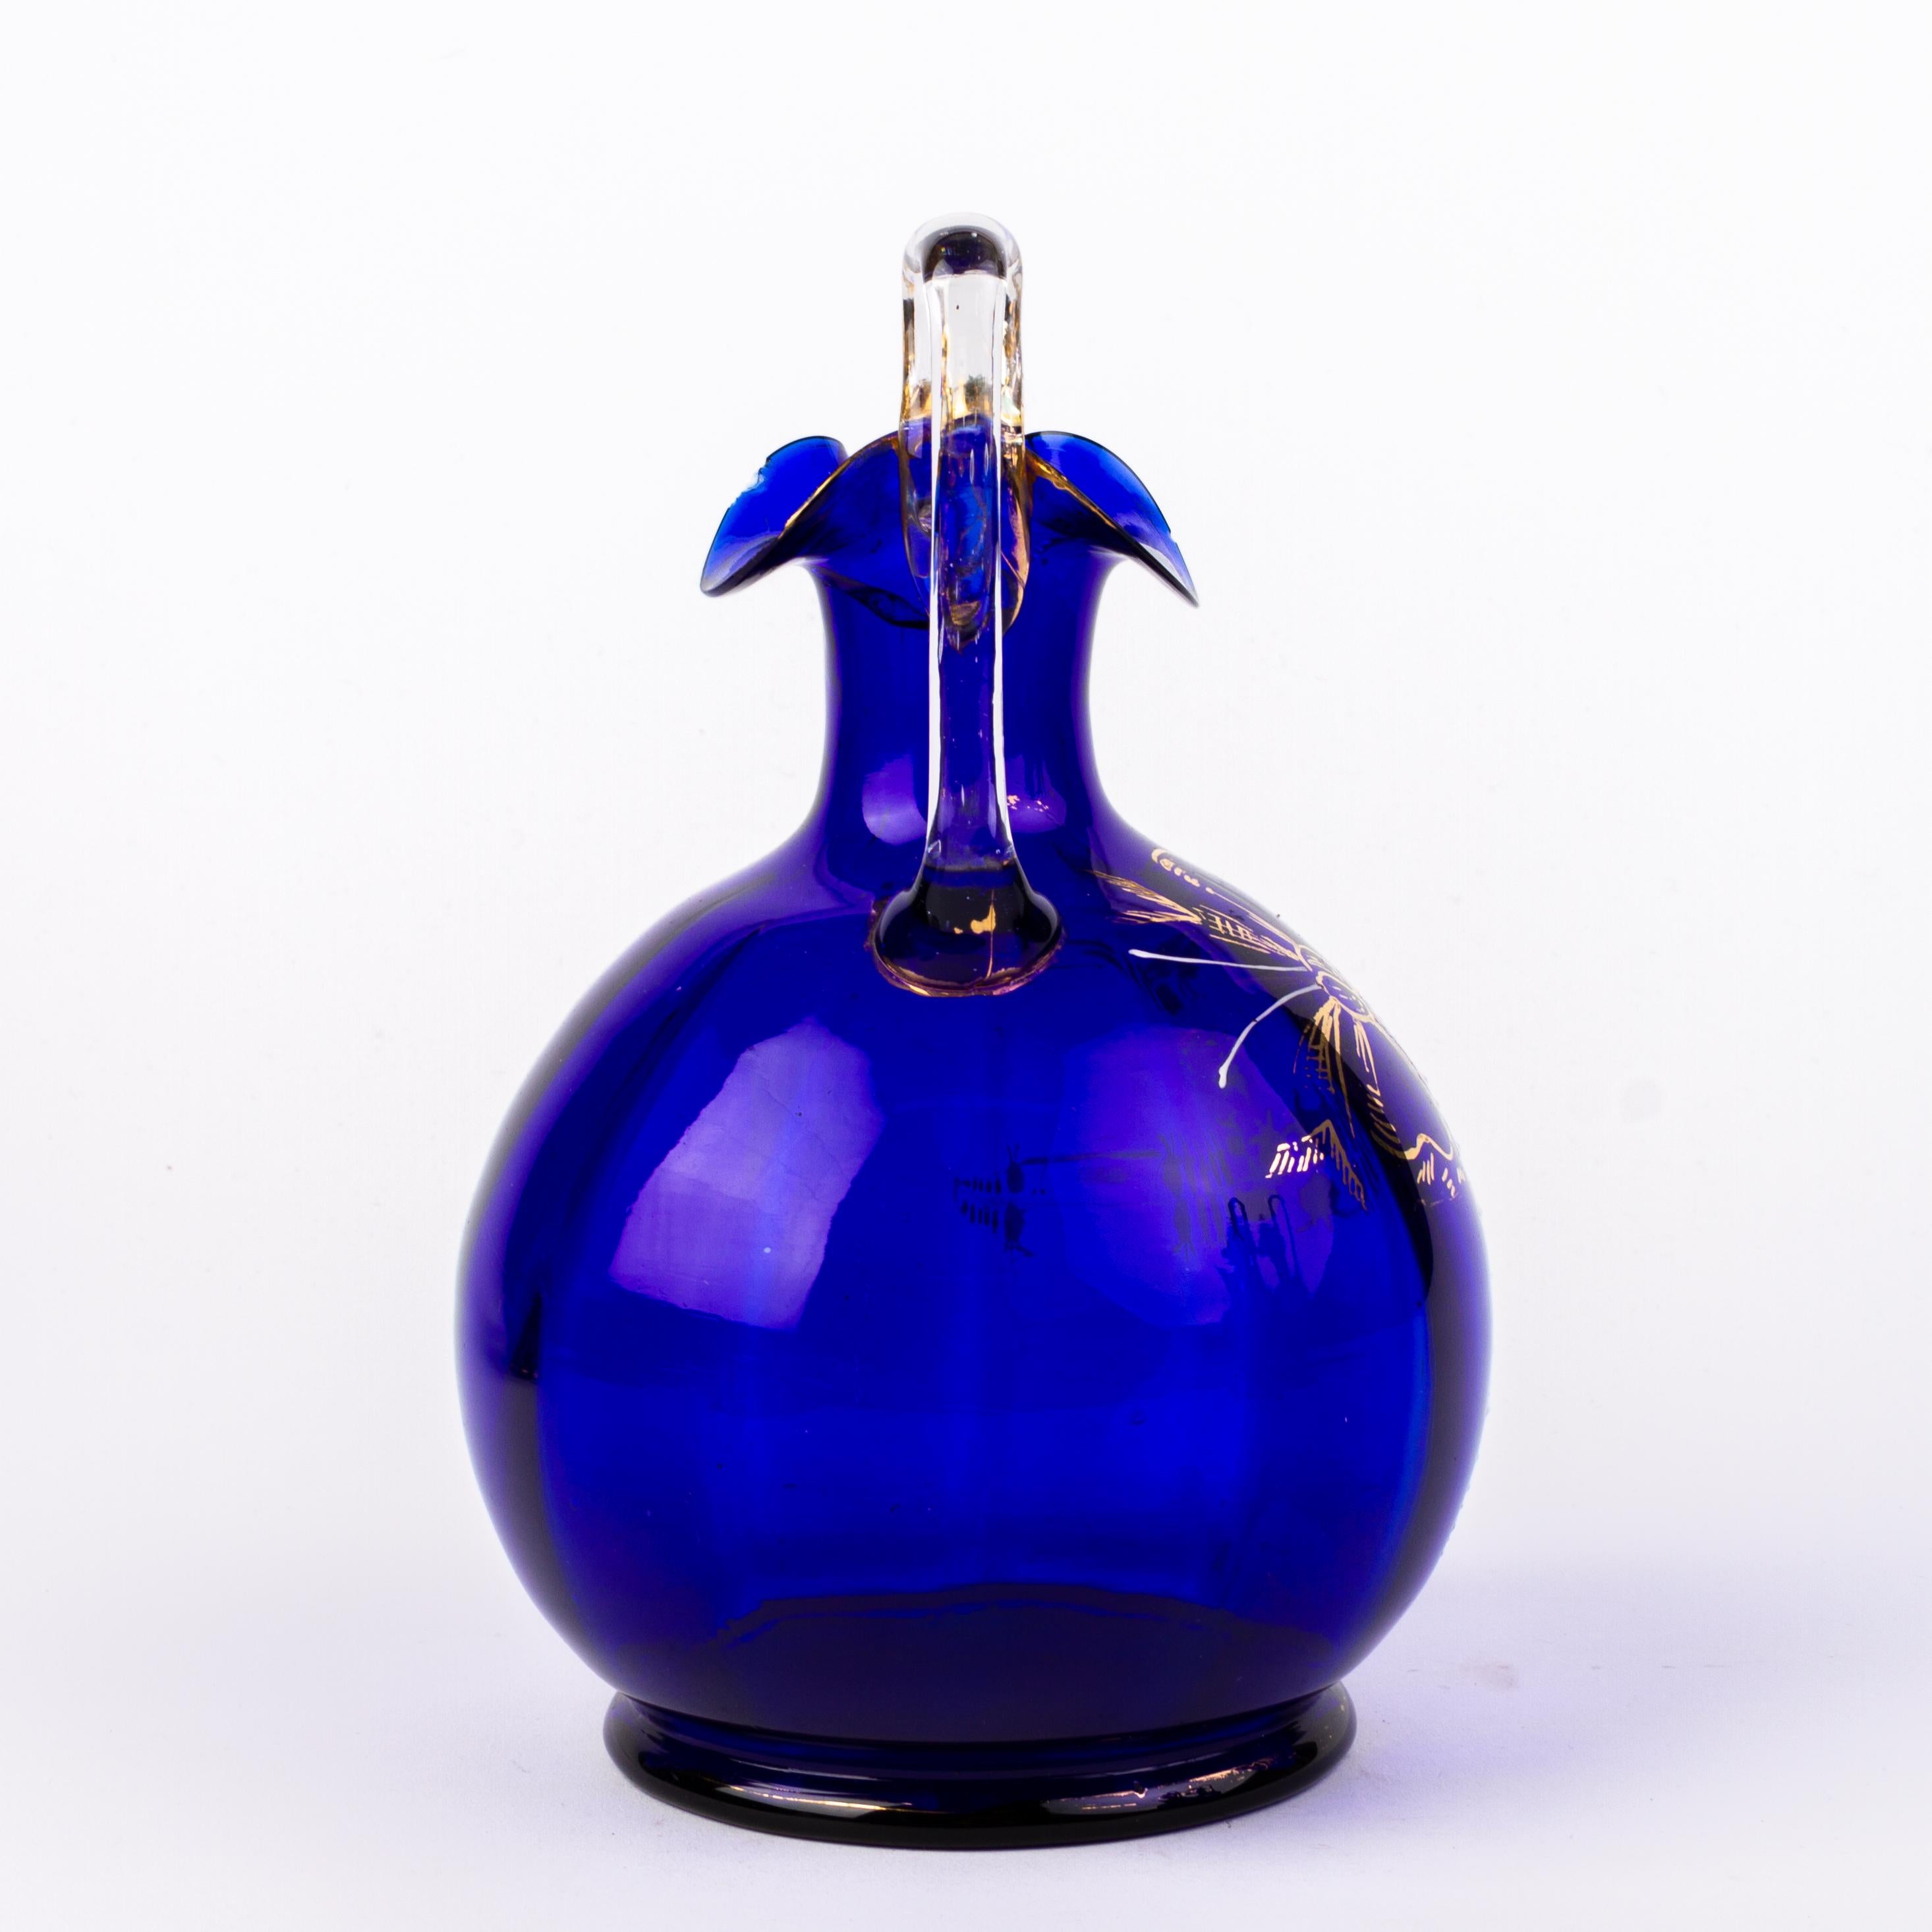 In good condition
From a private collection
Bristol Blue Victorian Enameled Glass Ewer 19th Century
